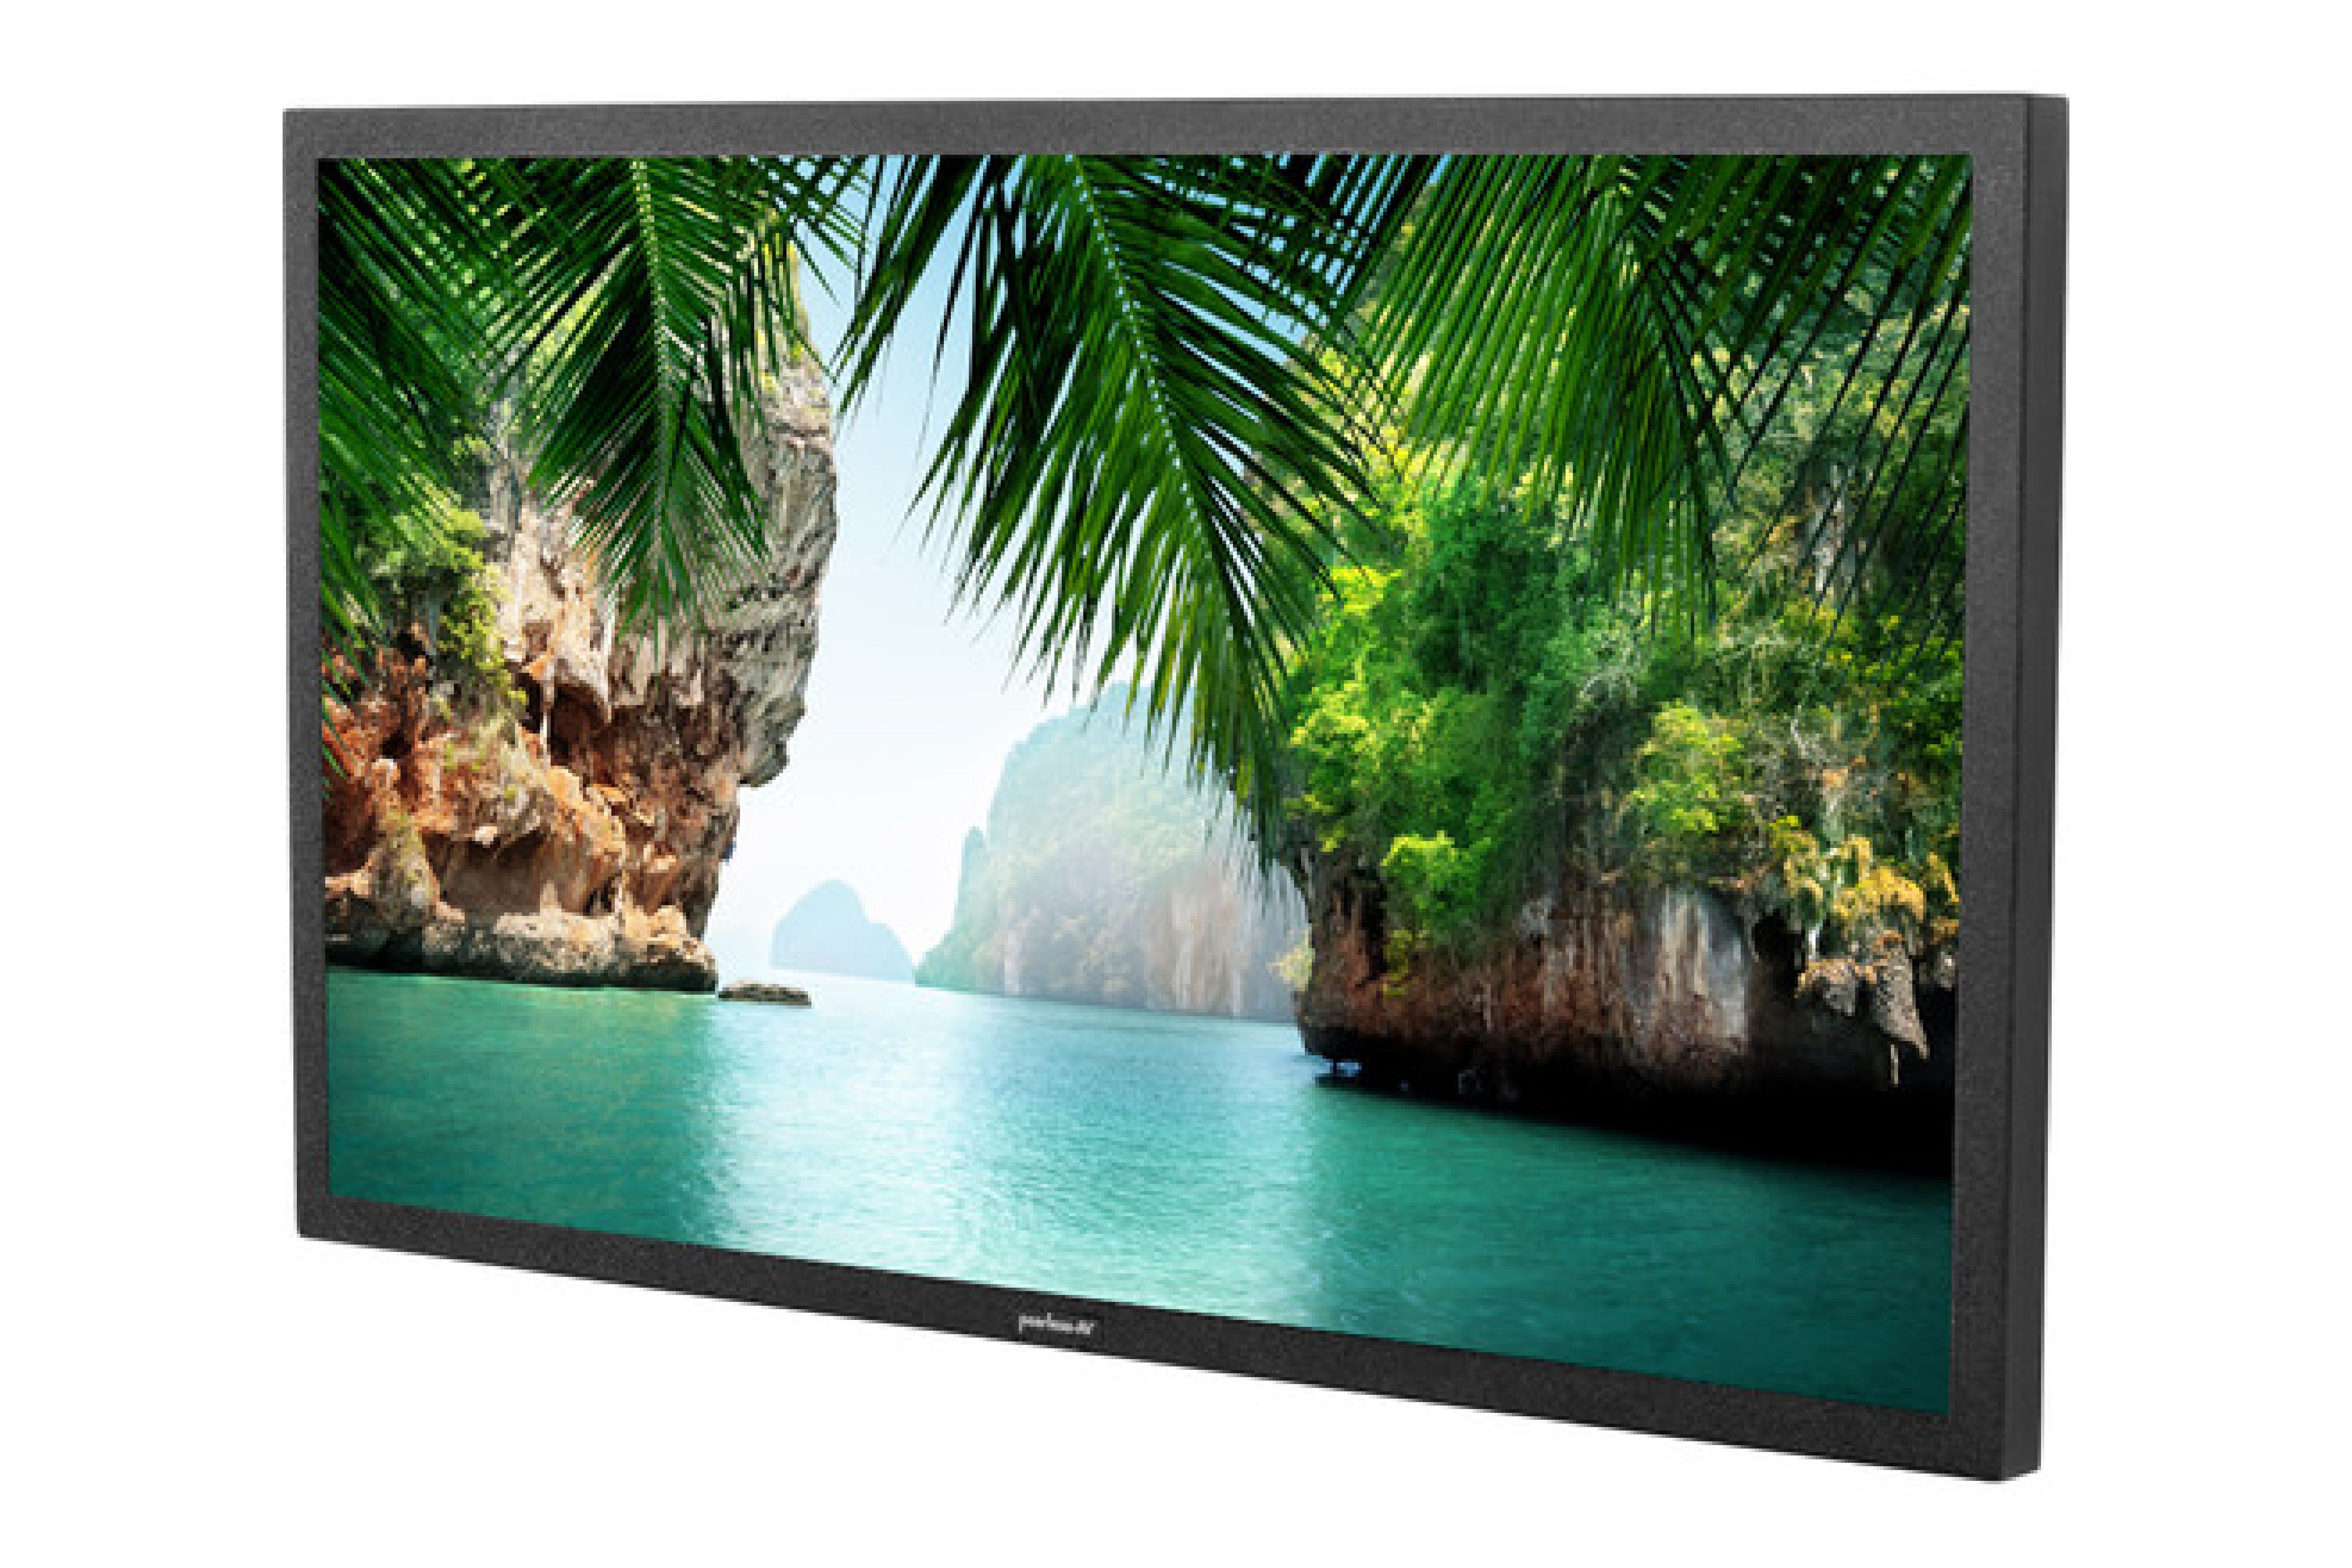 7 Best Outdoor Tvs Top Waterproof And, What Is A Good Tv For Outdoors